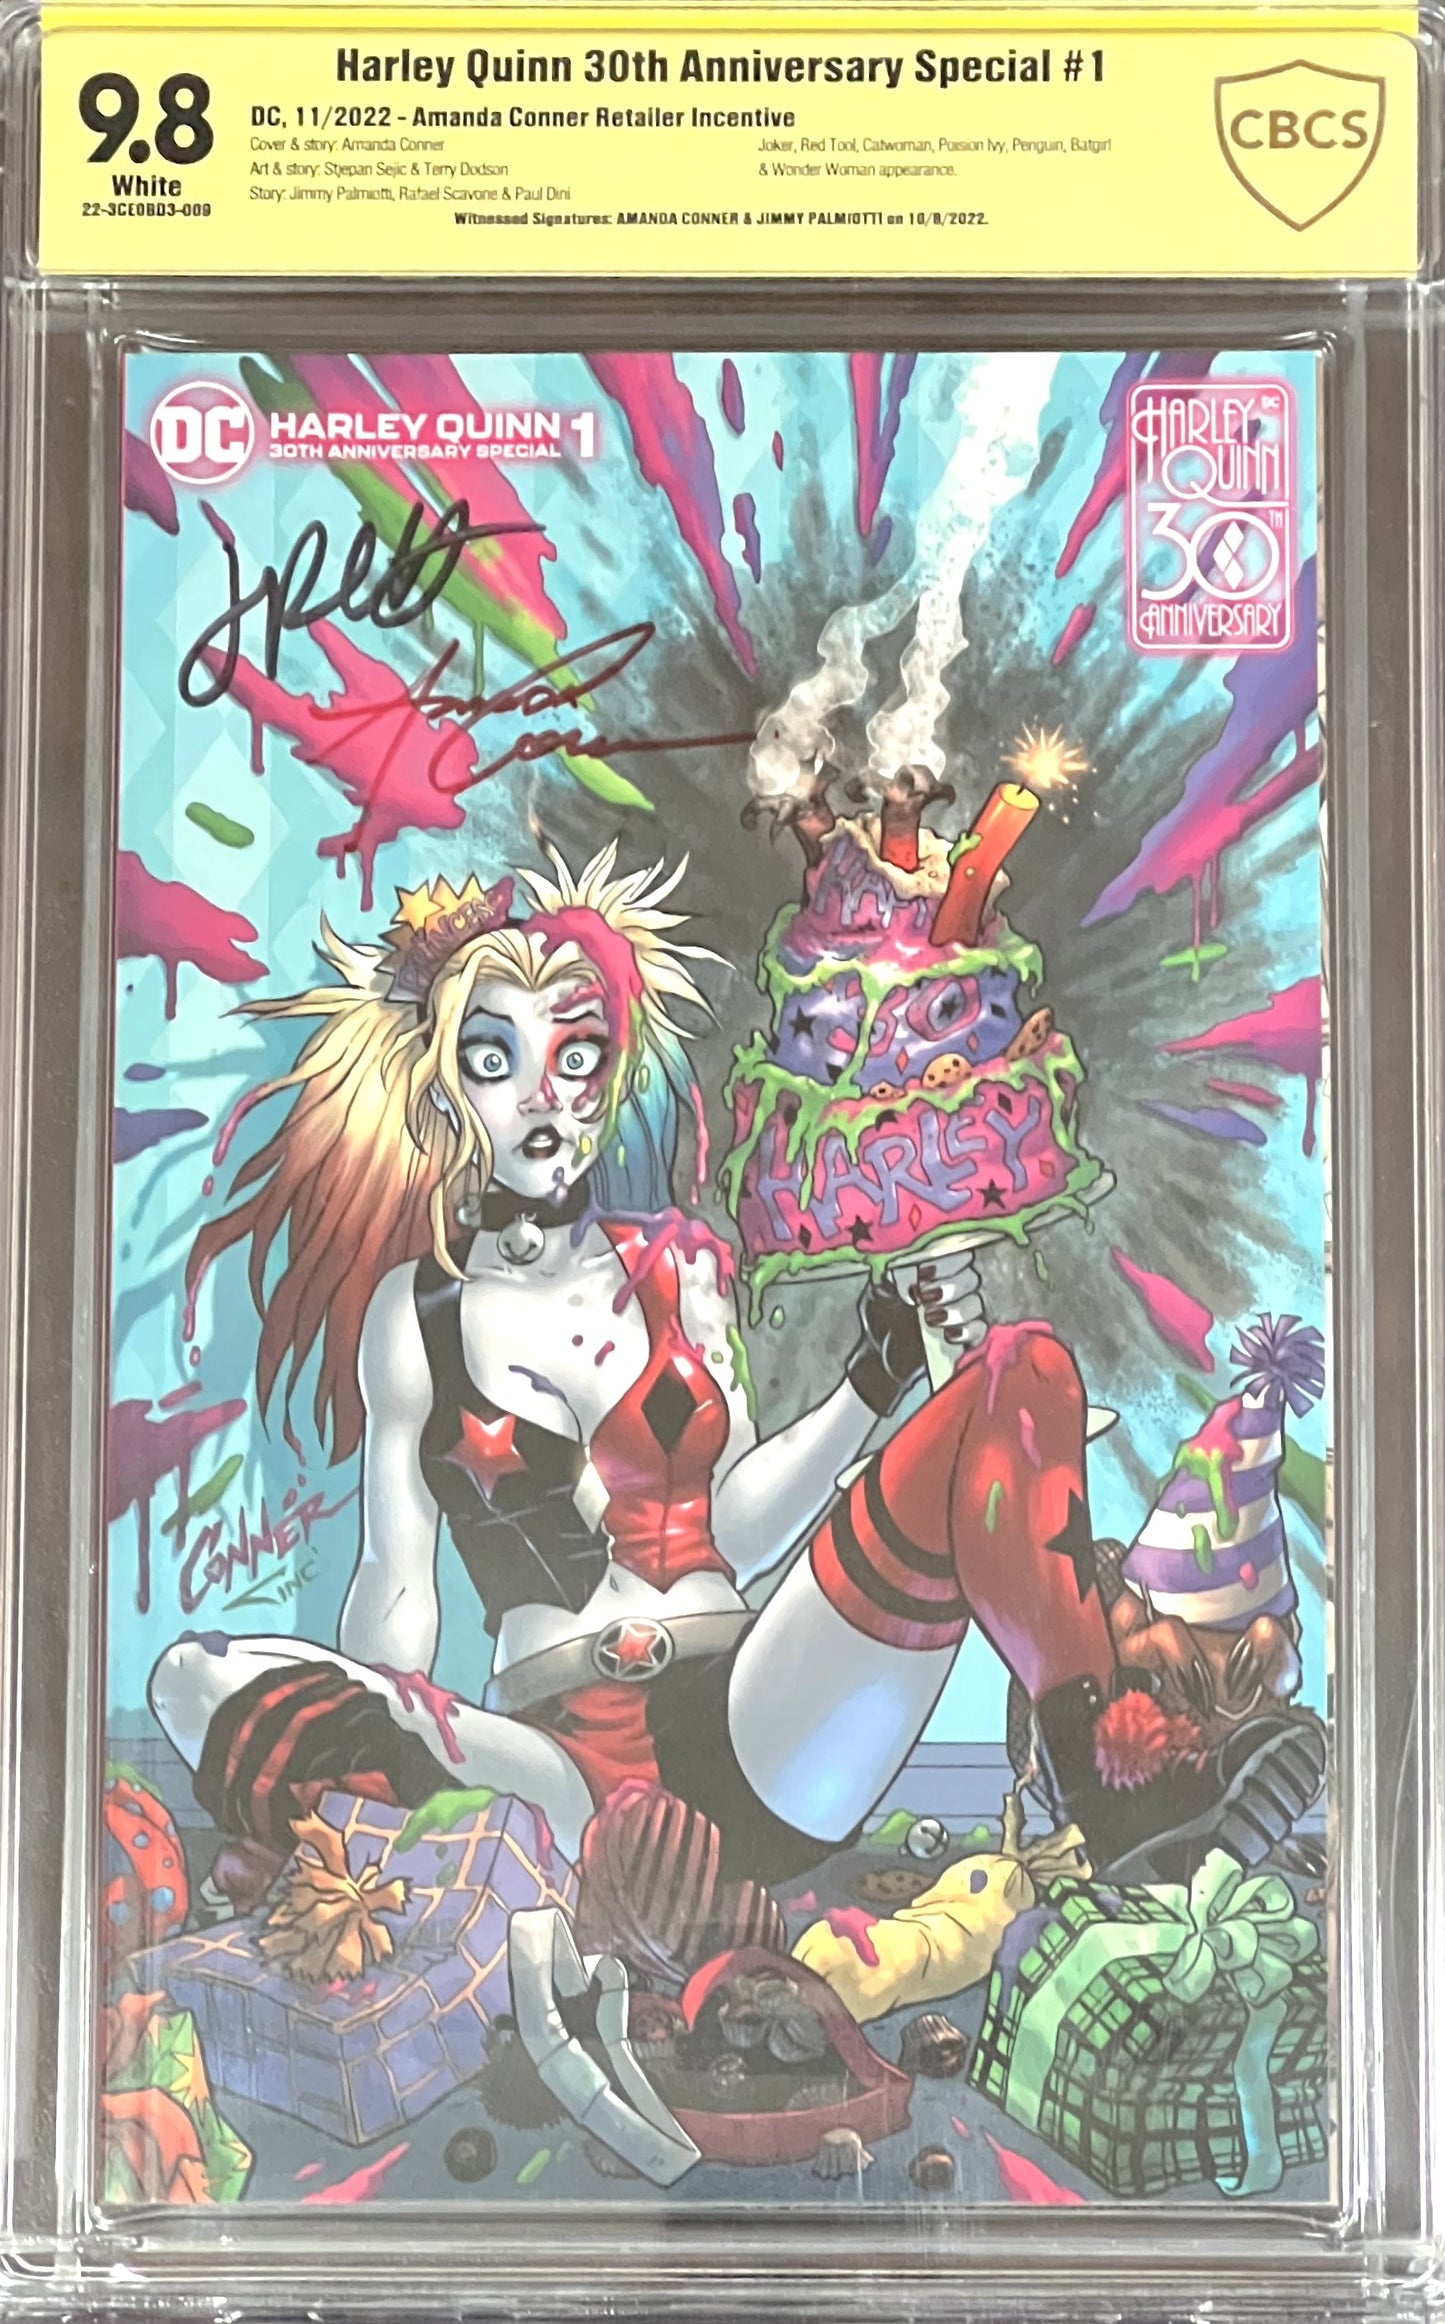 Harley Quinn 30th Anniversary Special. Amanda Conner J Signed.